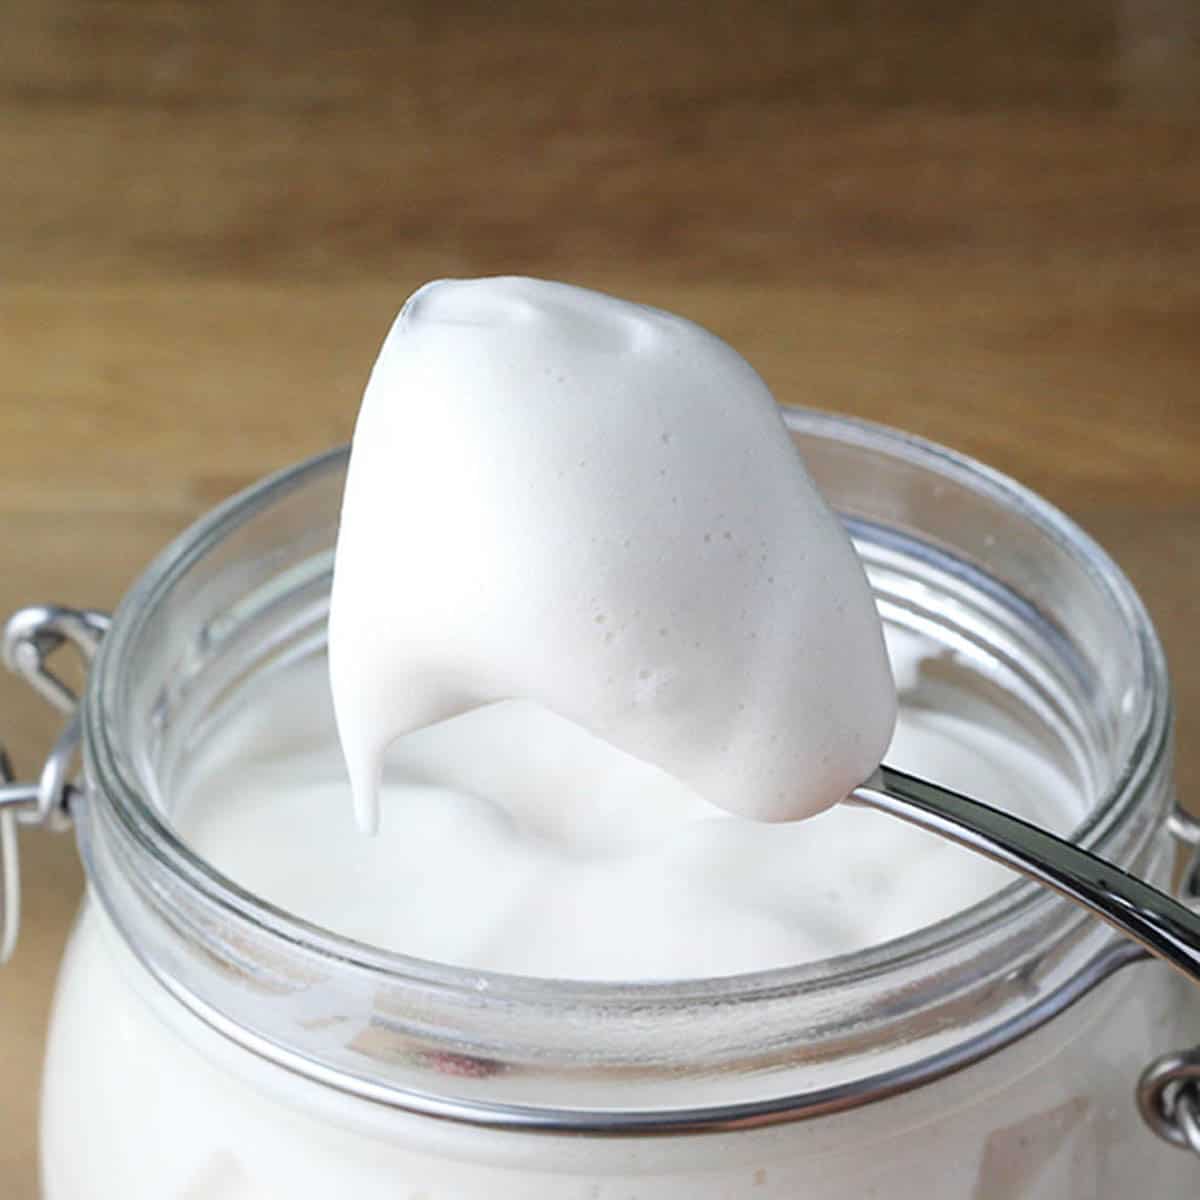 a spoonful of protein marshmallow fluff being pulled up from the jar on a wood table